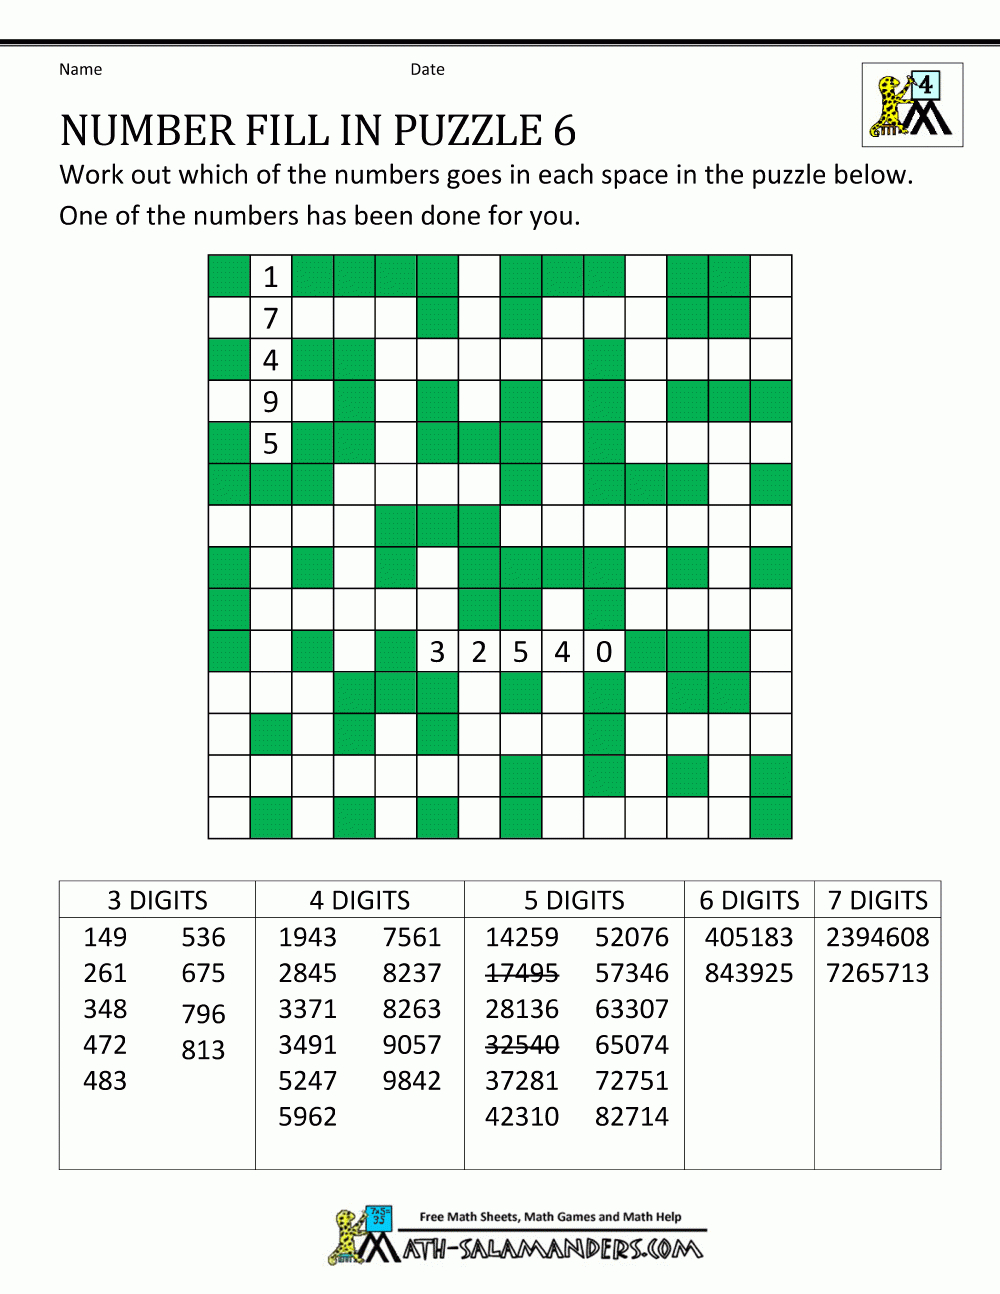 Number Fill In Puzzles - Free Printable Crossword Puzzle #5